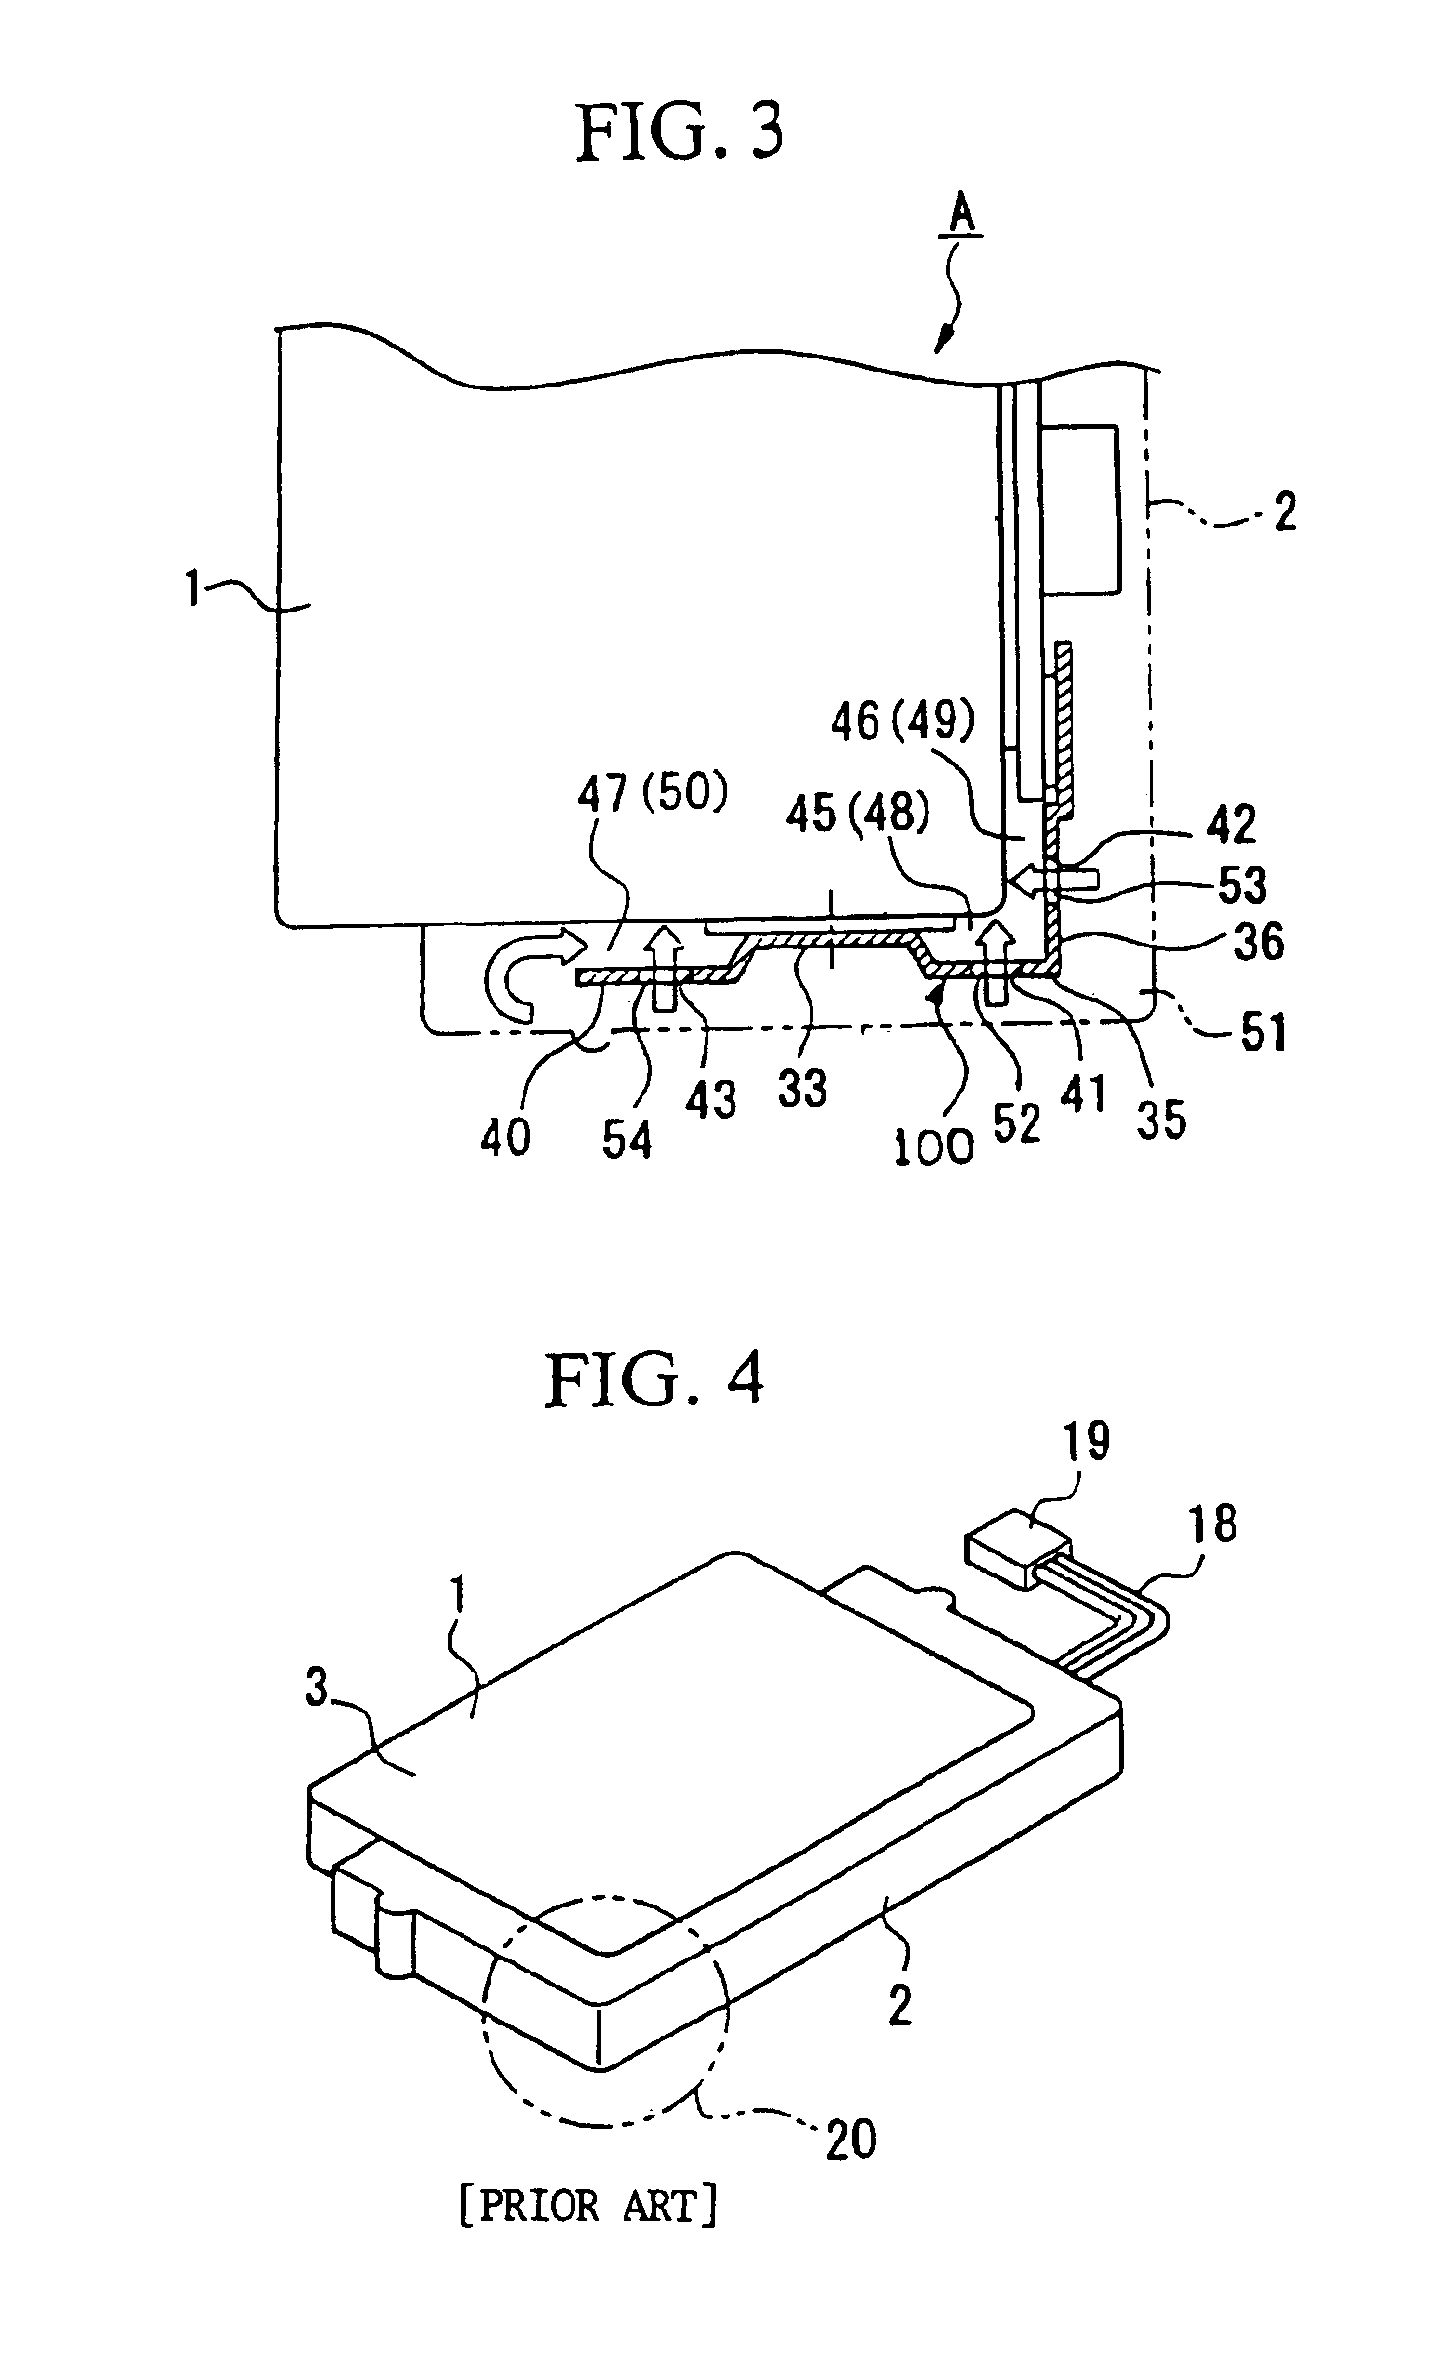 Battery having a circuit board attached to it and a molded section enveloping the battery and the circuit board